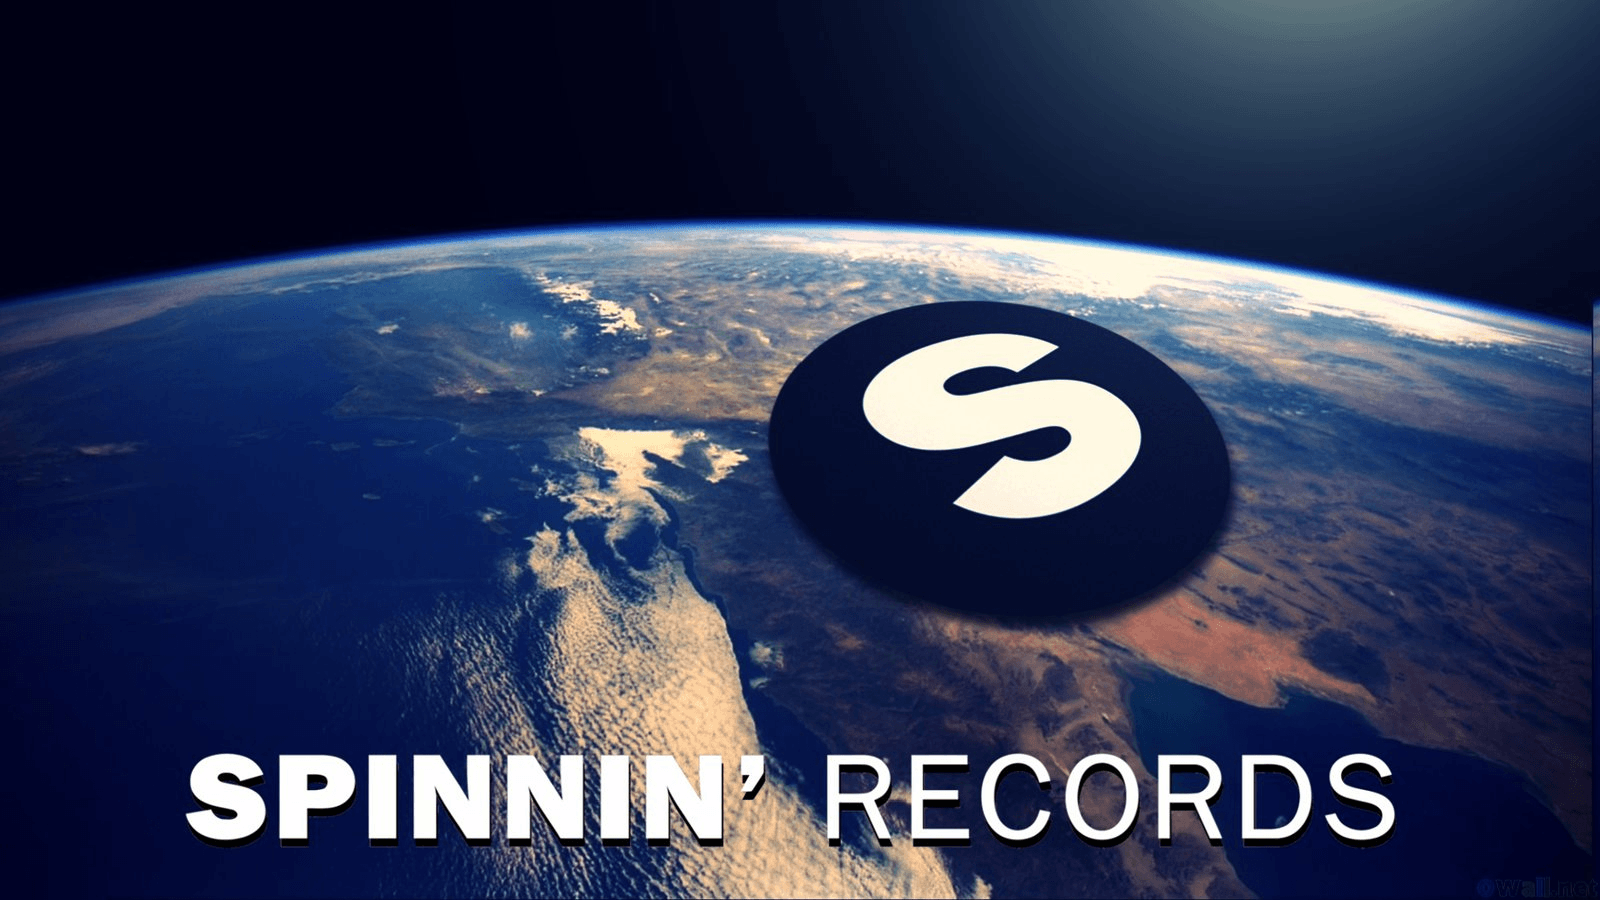 Spinnin Records music videos of the week